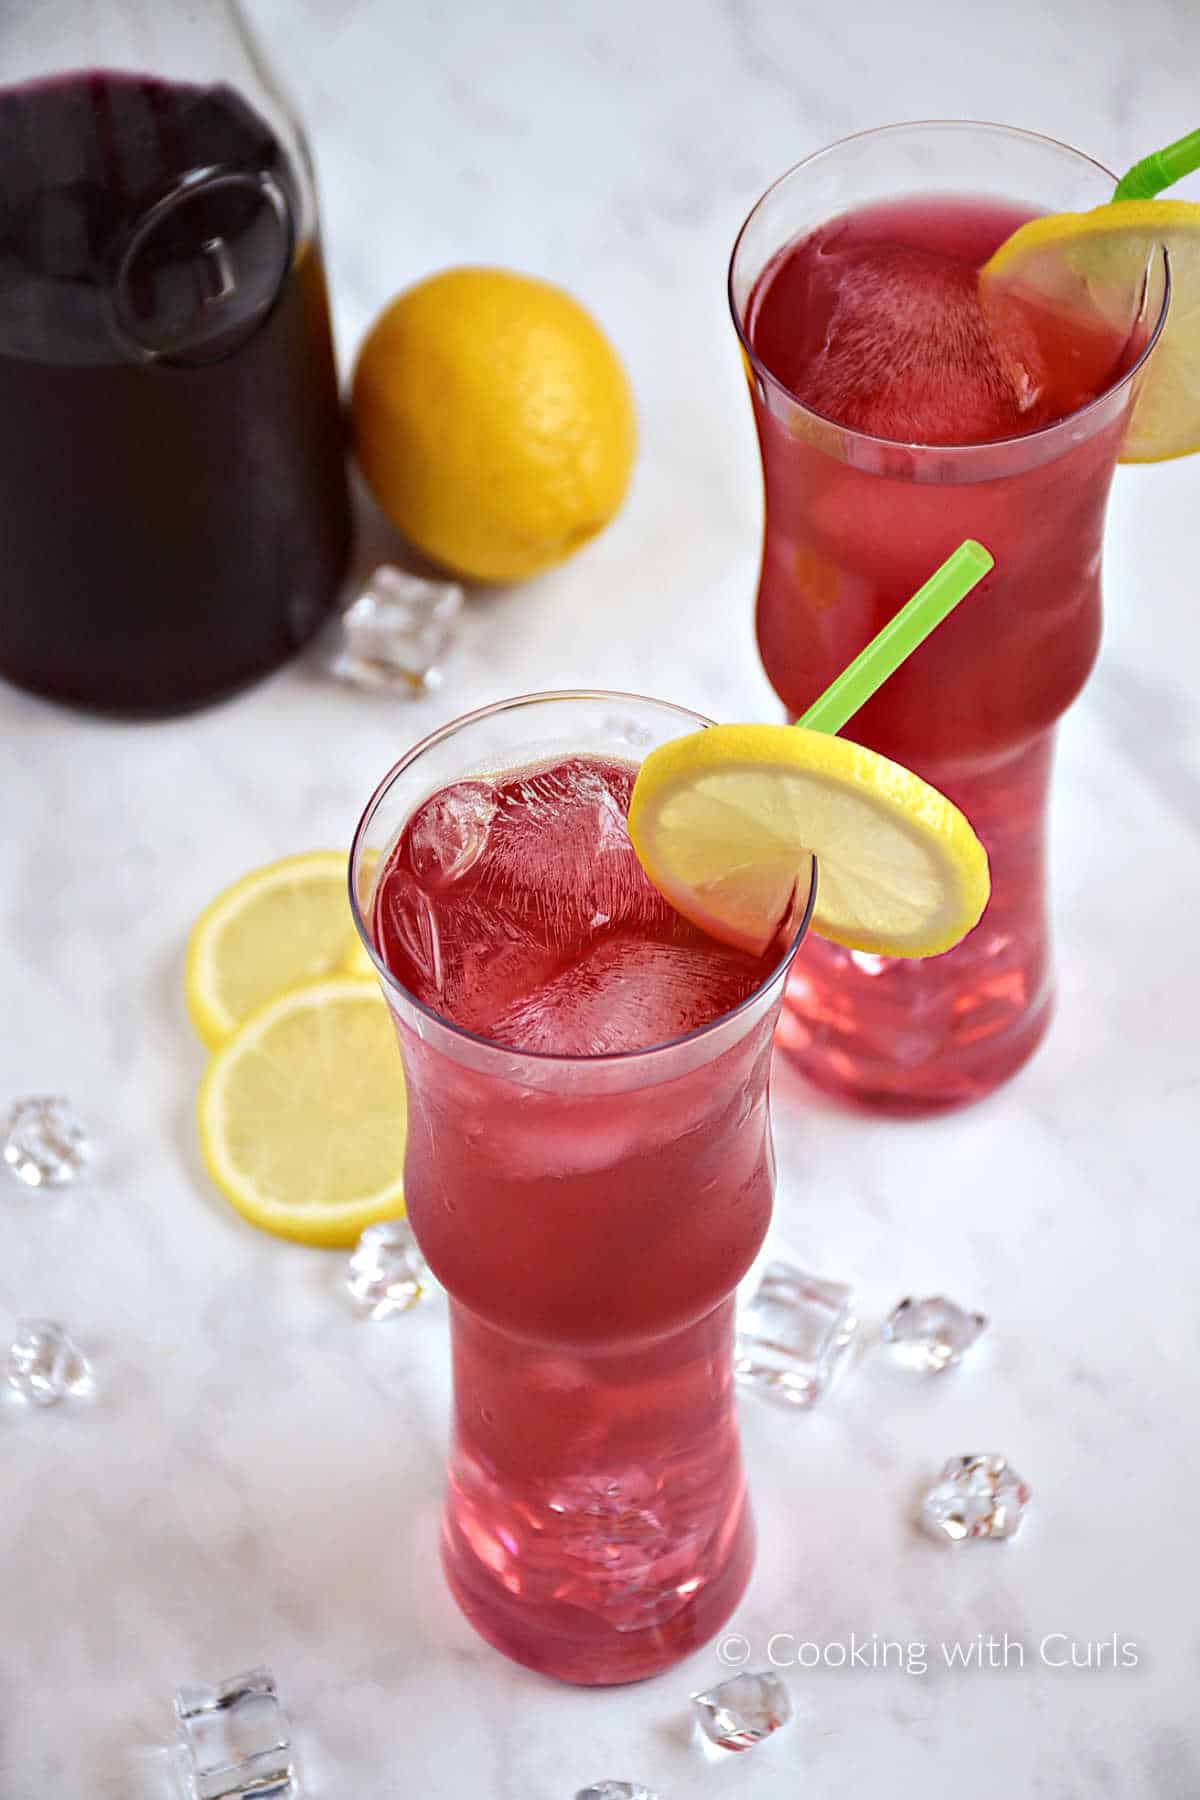 Two tall glasses filled with ice cubes and passion tea lemonade with a lemon slice garnish with a jar of passion tea in the background.